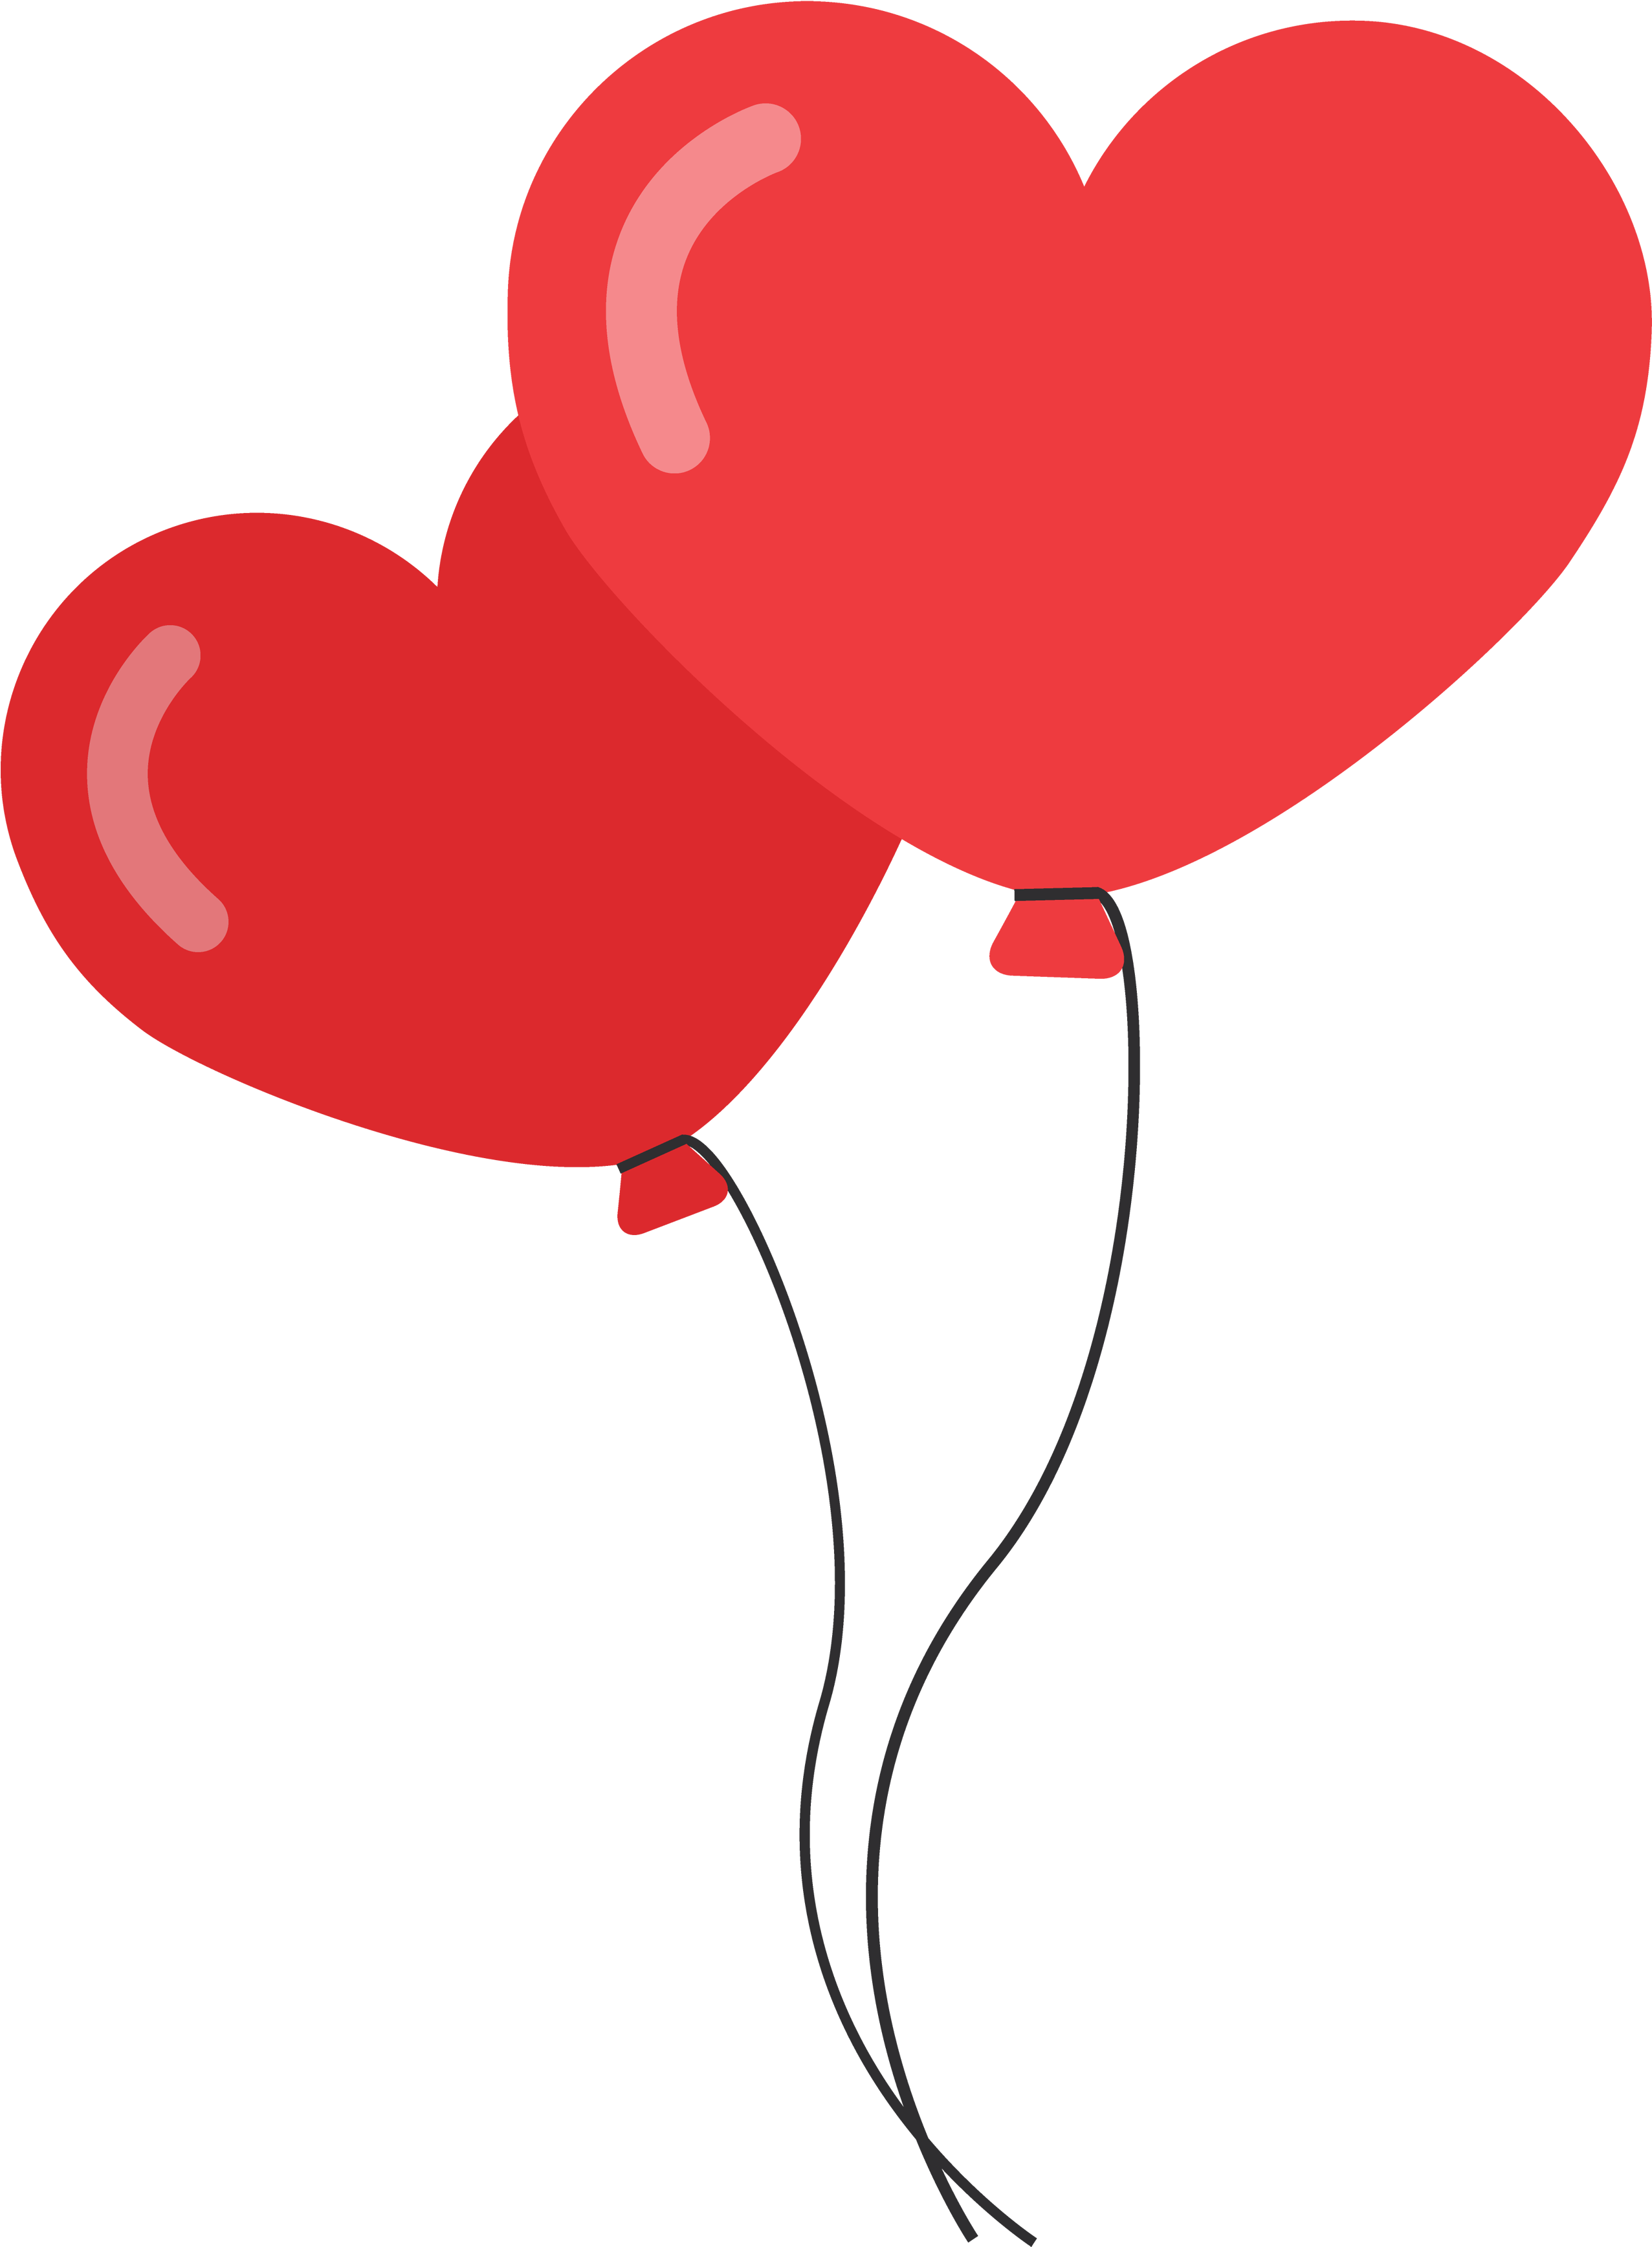 Heart Balloon PNG Images